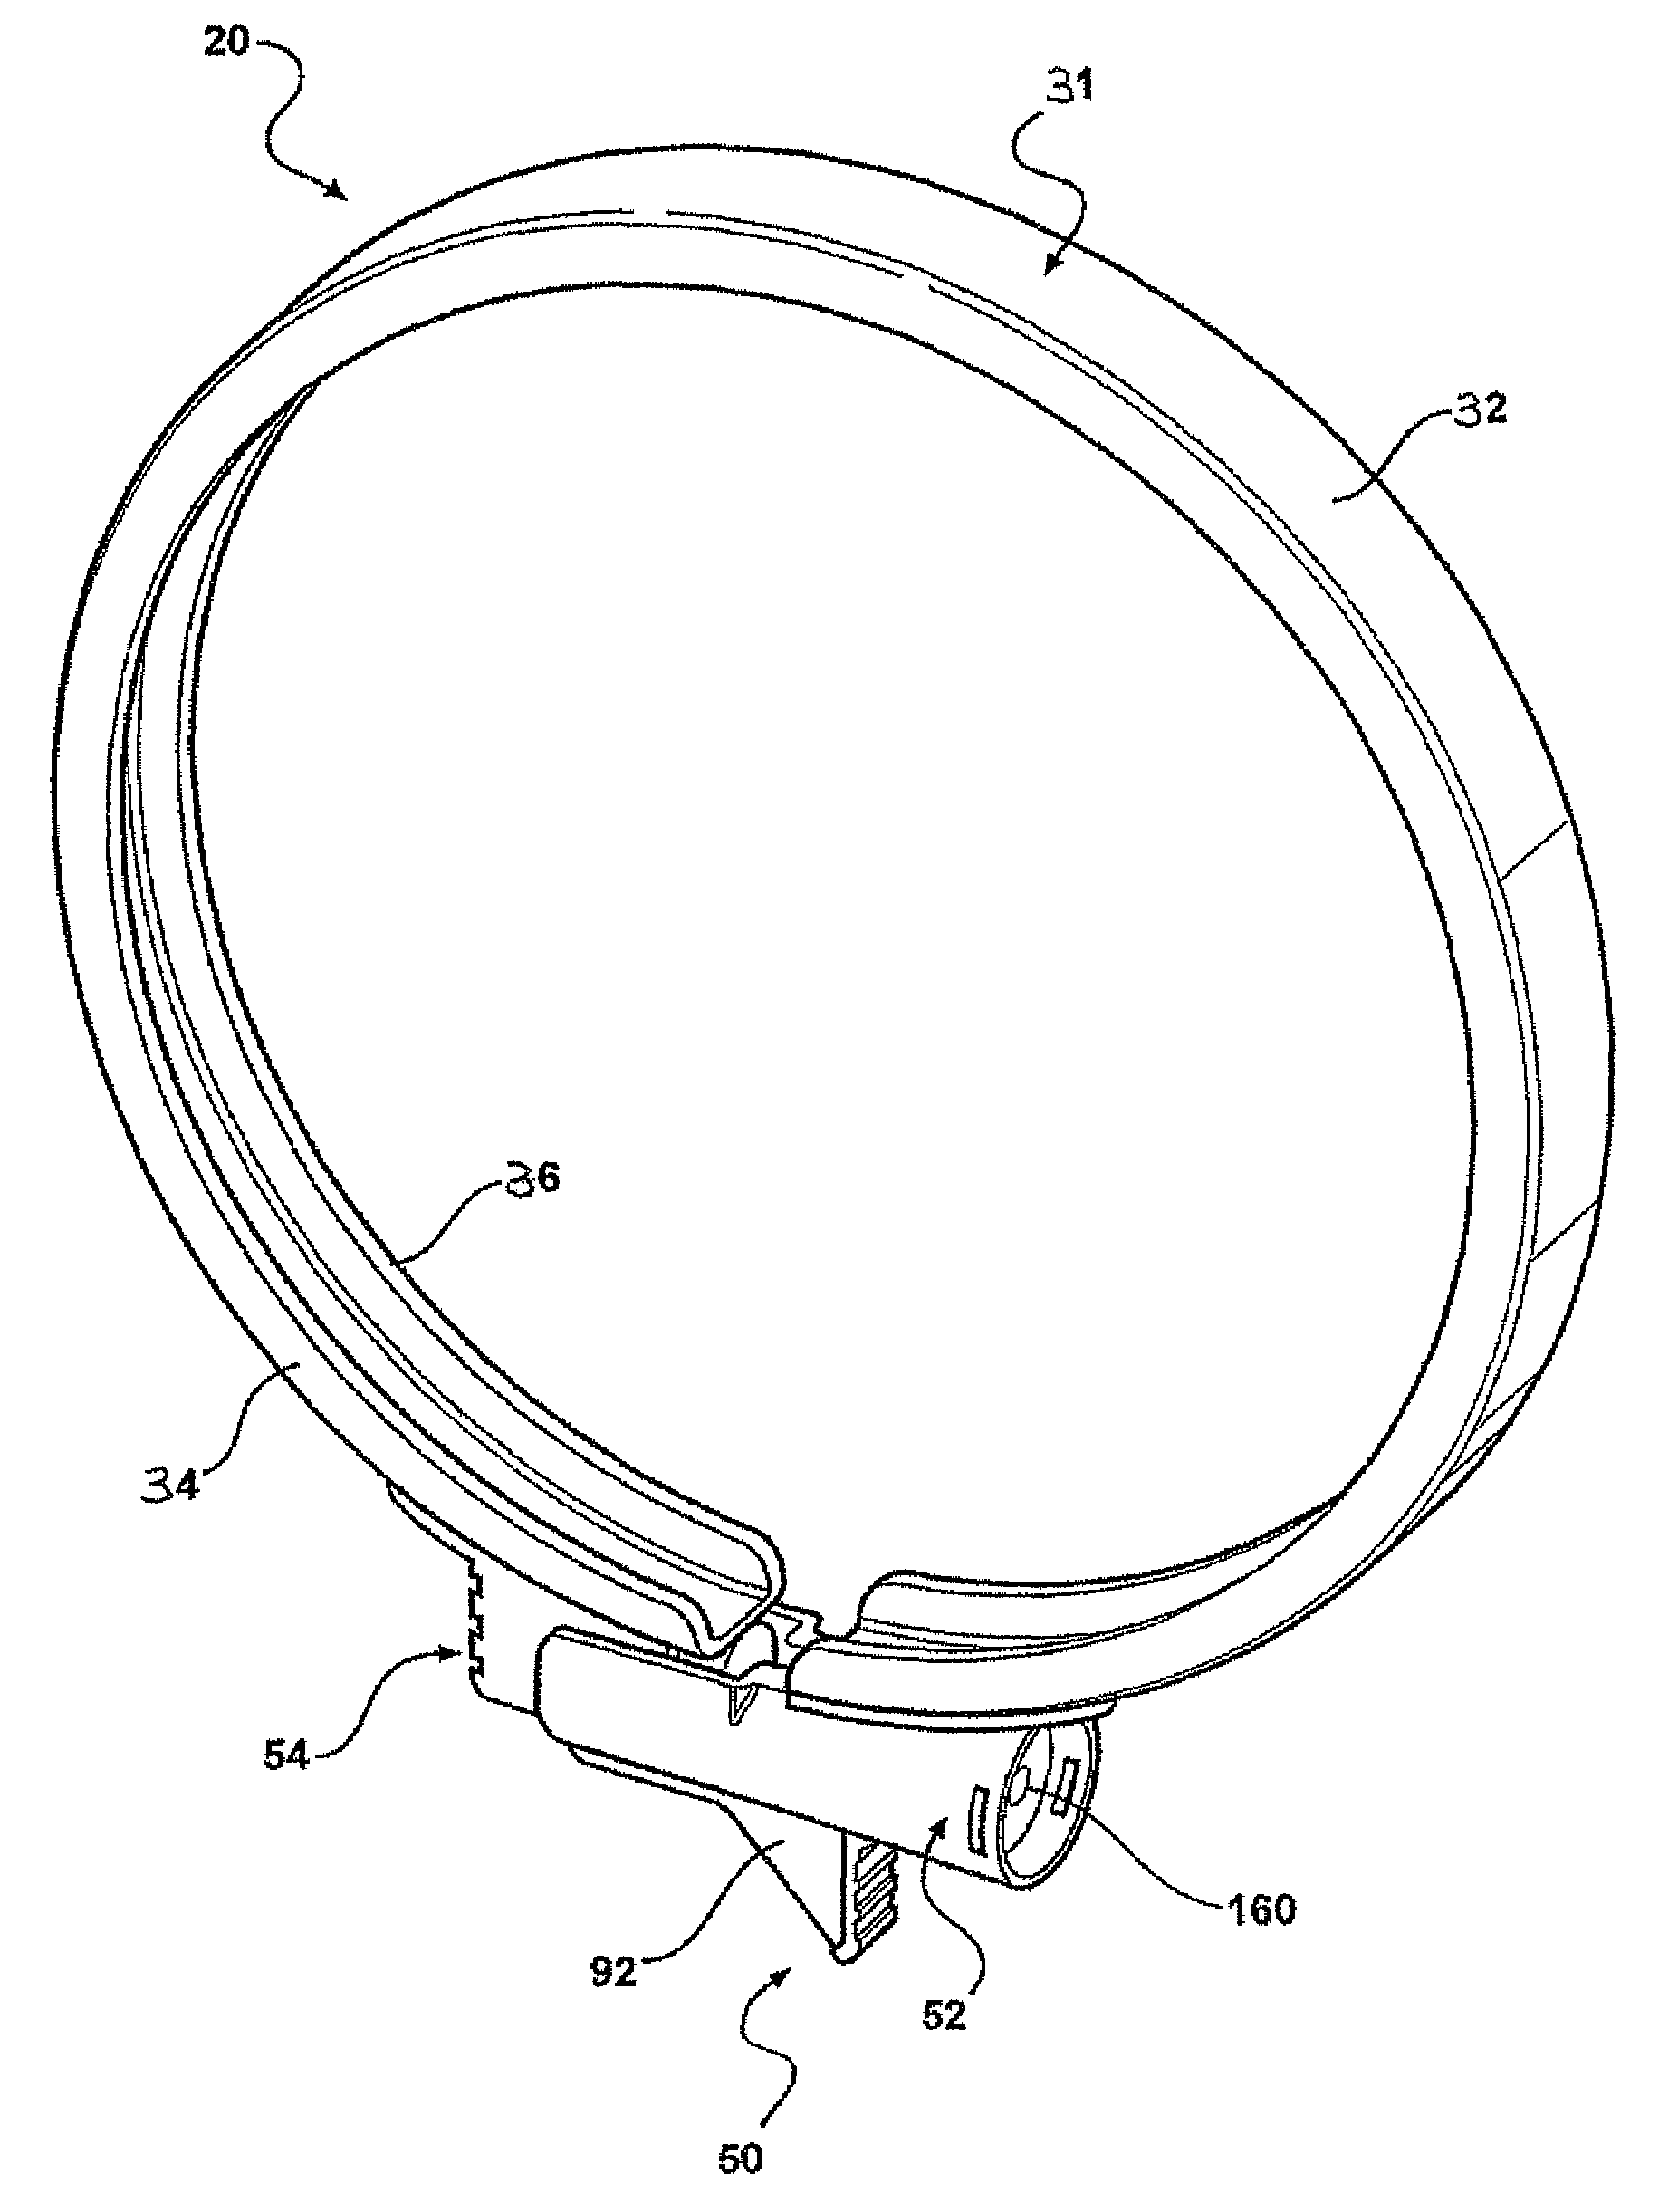 Lock ring for a watthour meter application